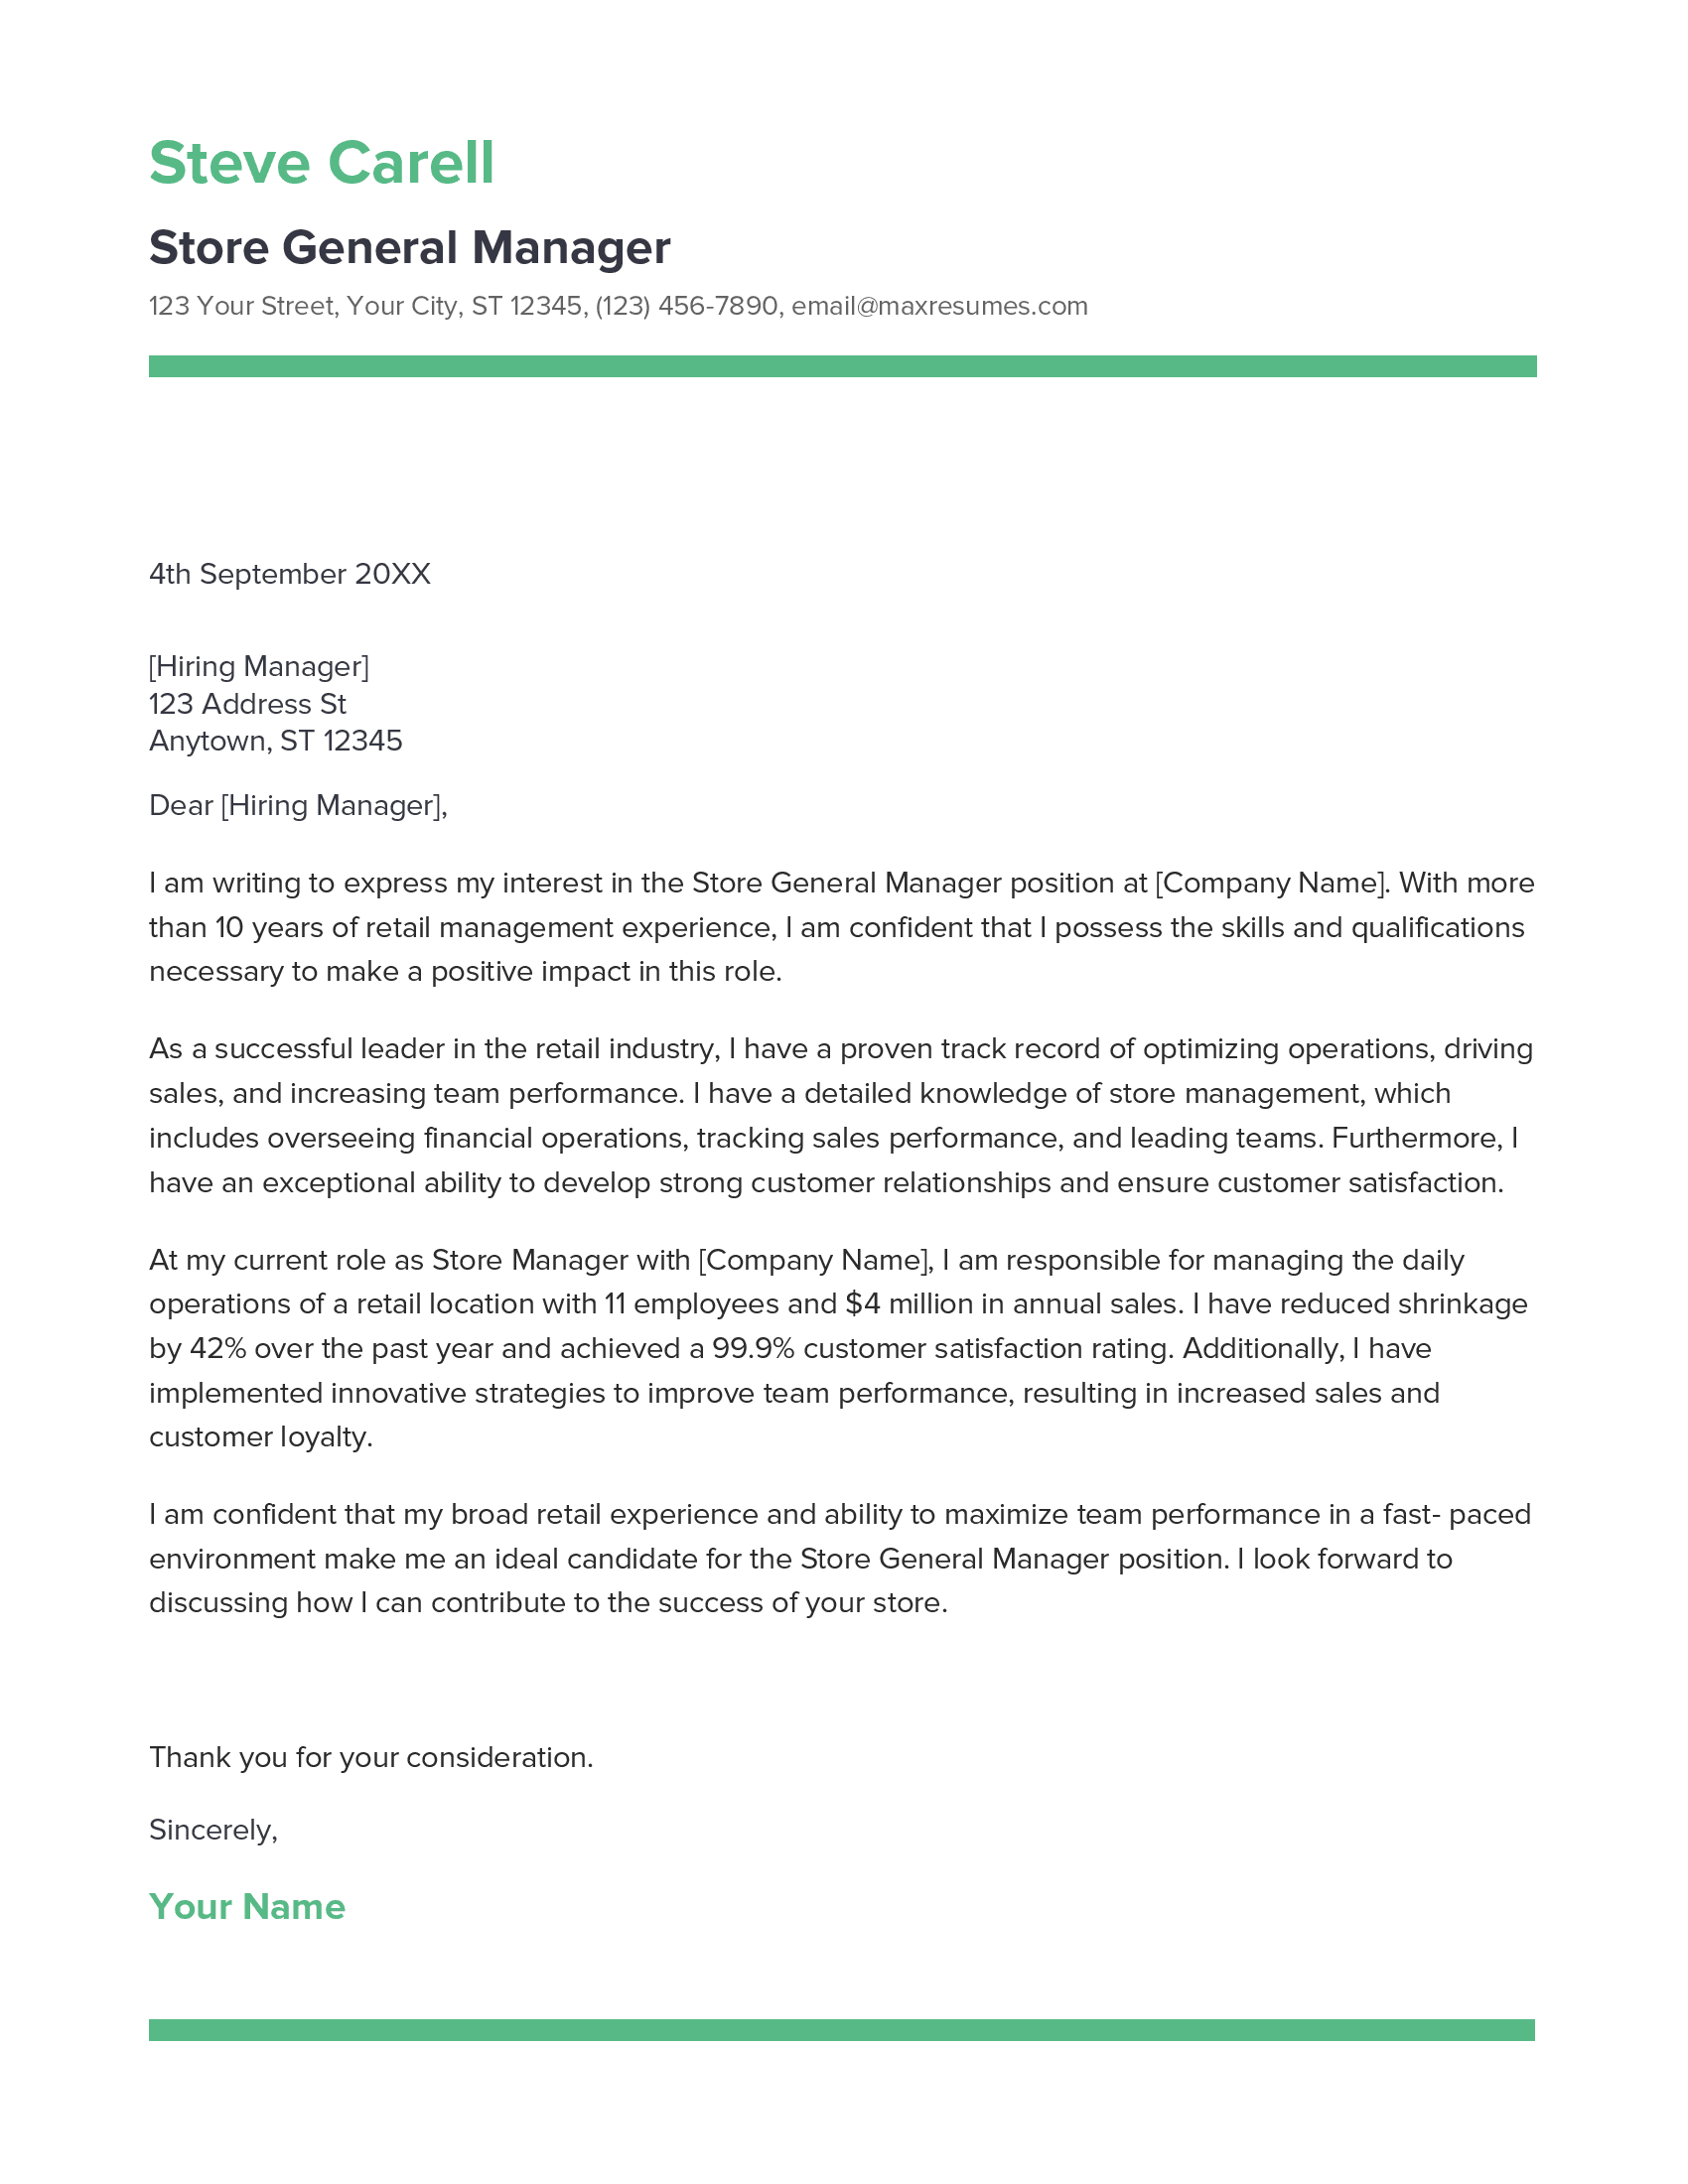 Store General Manager Cover Letter Example